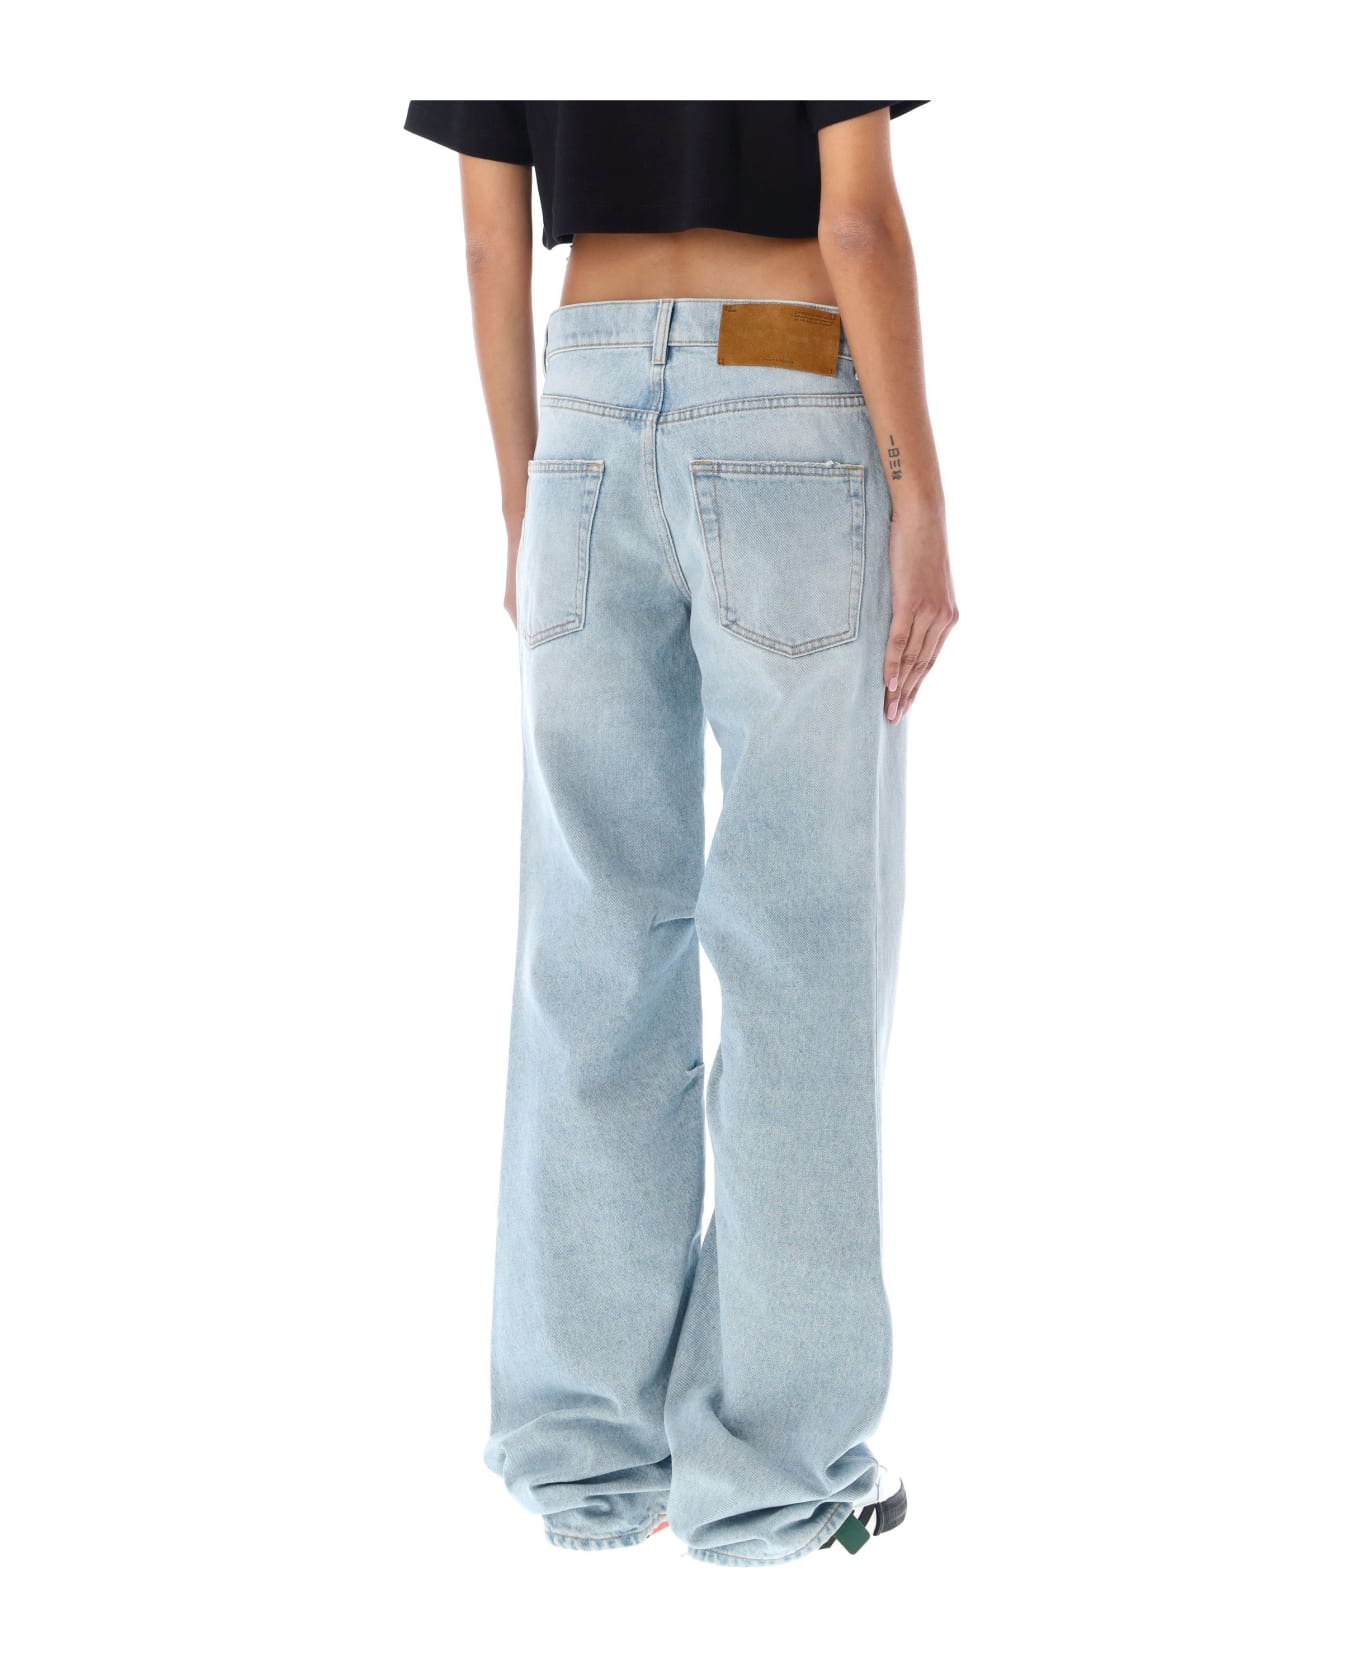 Off-White Bleach Baby Baggy Chino Jeans - DENIM BLUE